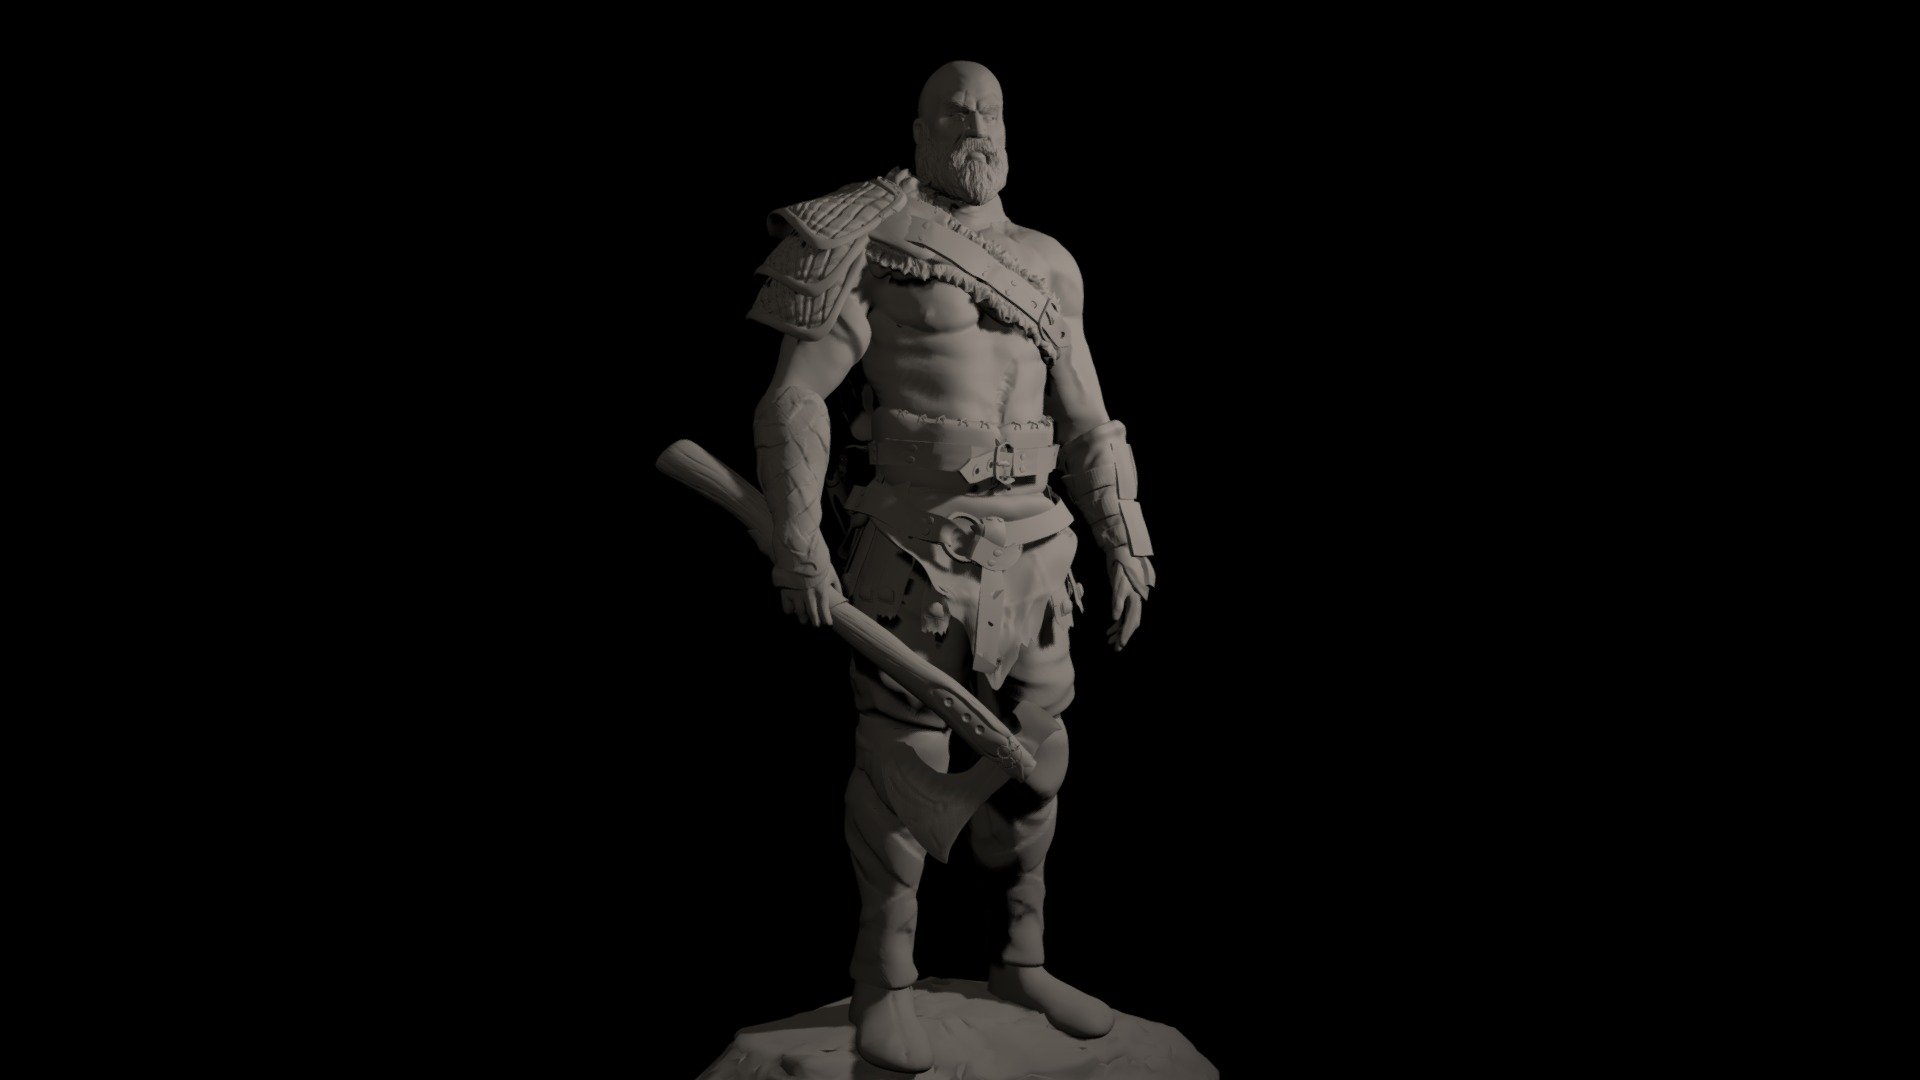 kratos-from-god-of-war-free-download-download-free-3d-model-by-eon